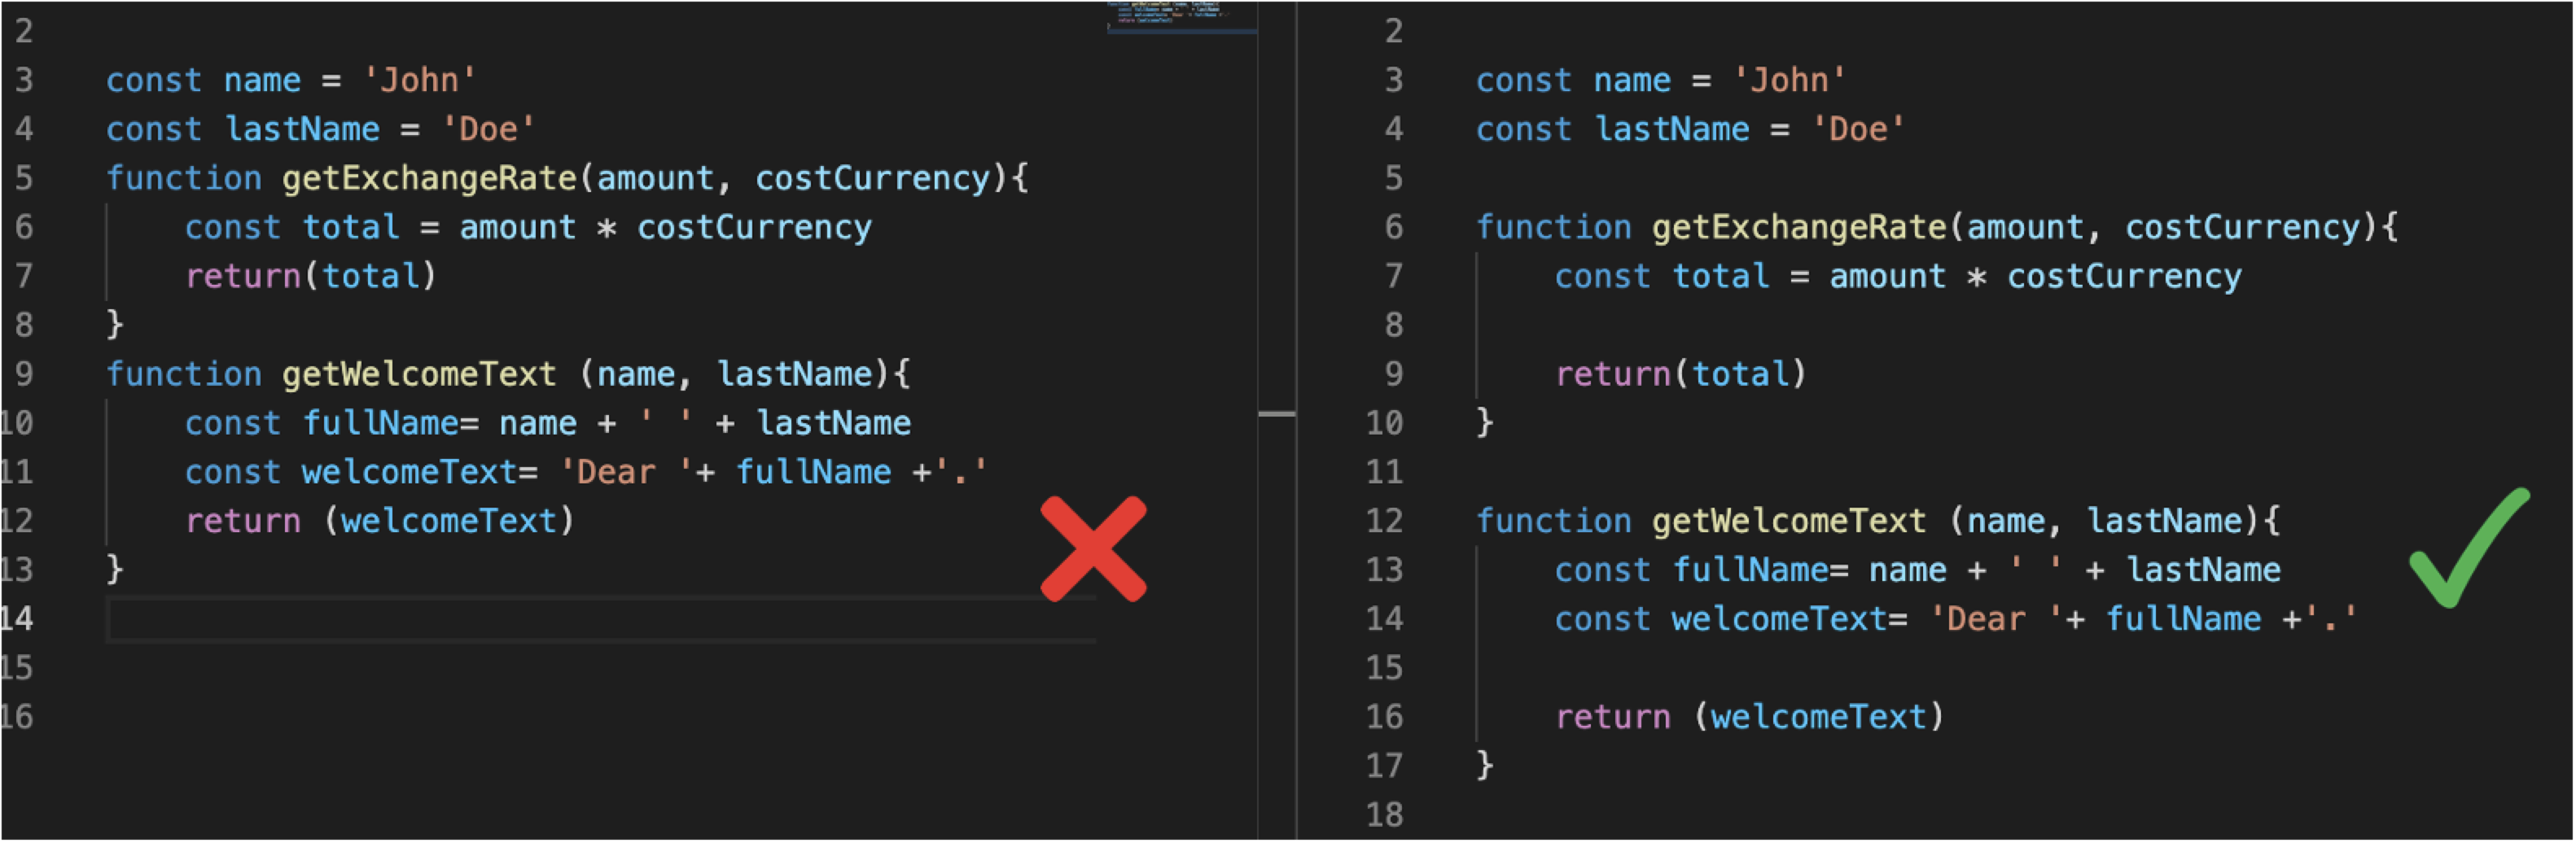 10 Tips For Writing Cleaner Code In Any Programming Language - Unosquare